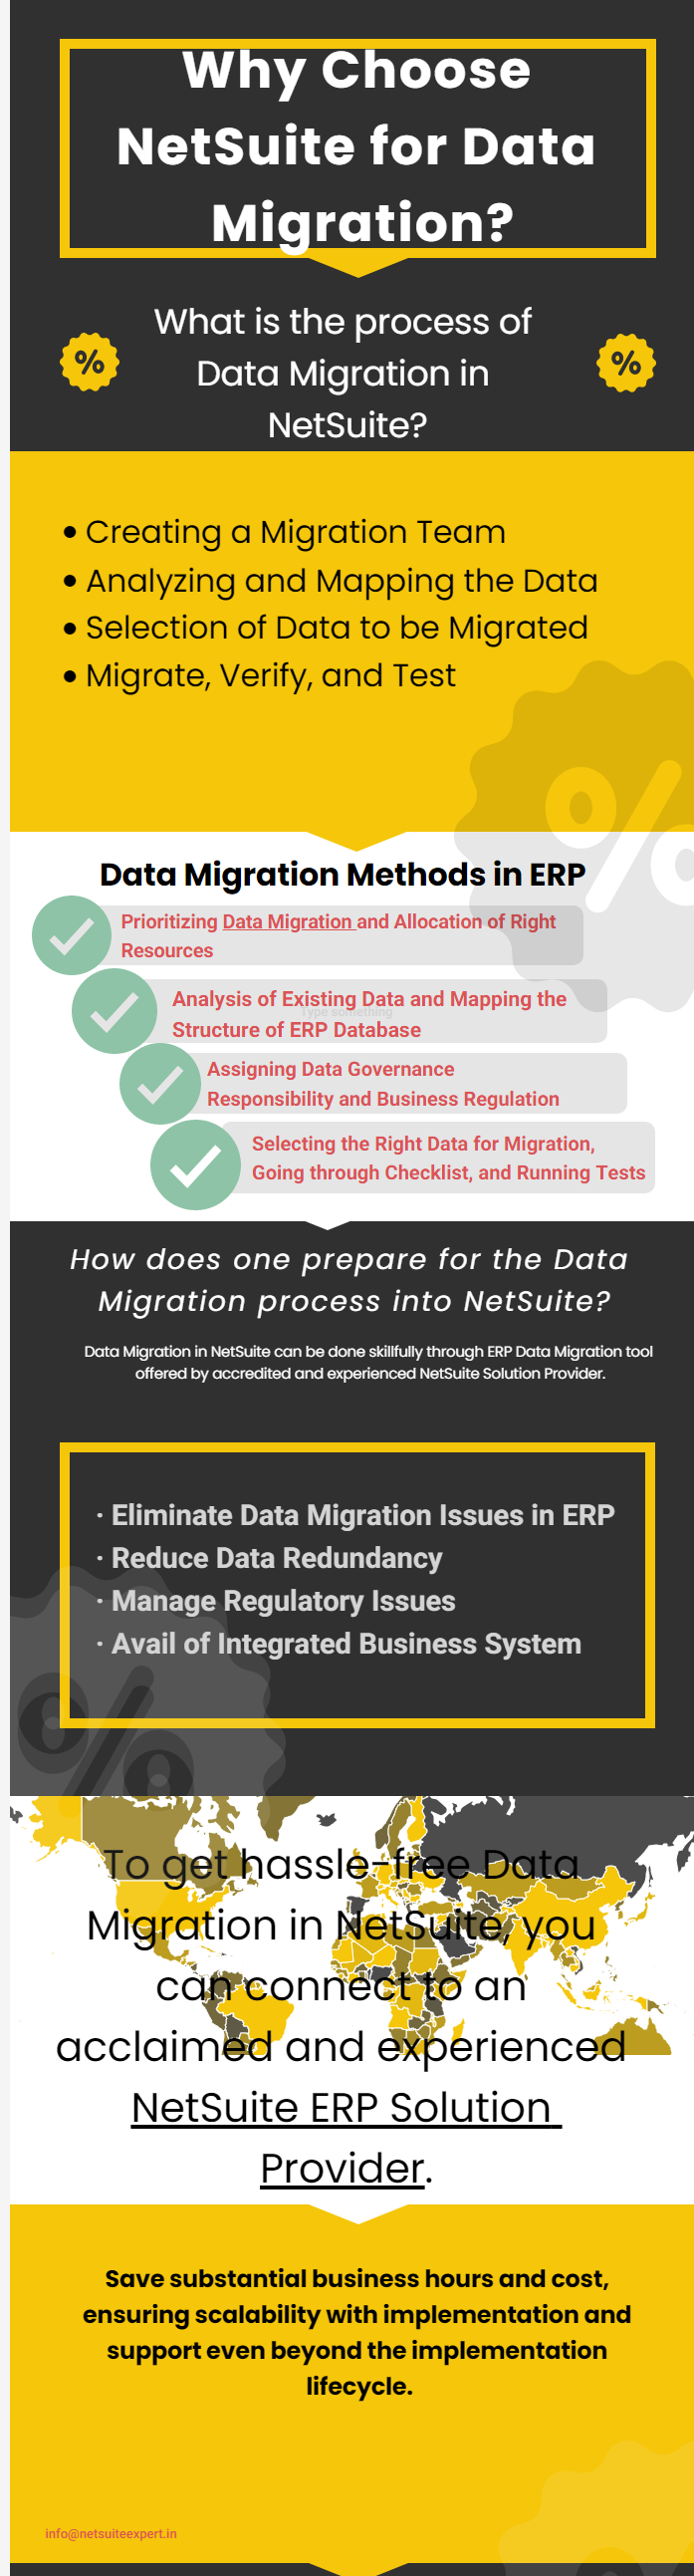 Why Choose NetSuite for Data Migration?